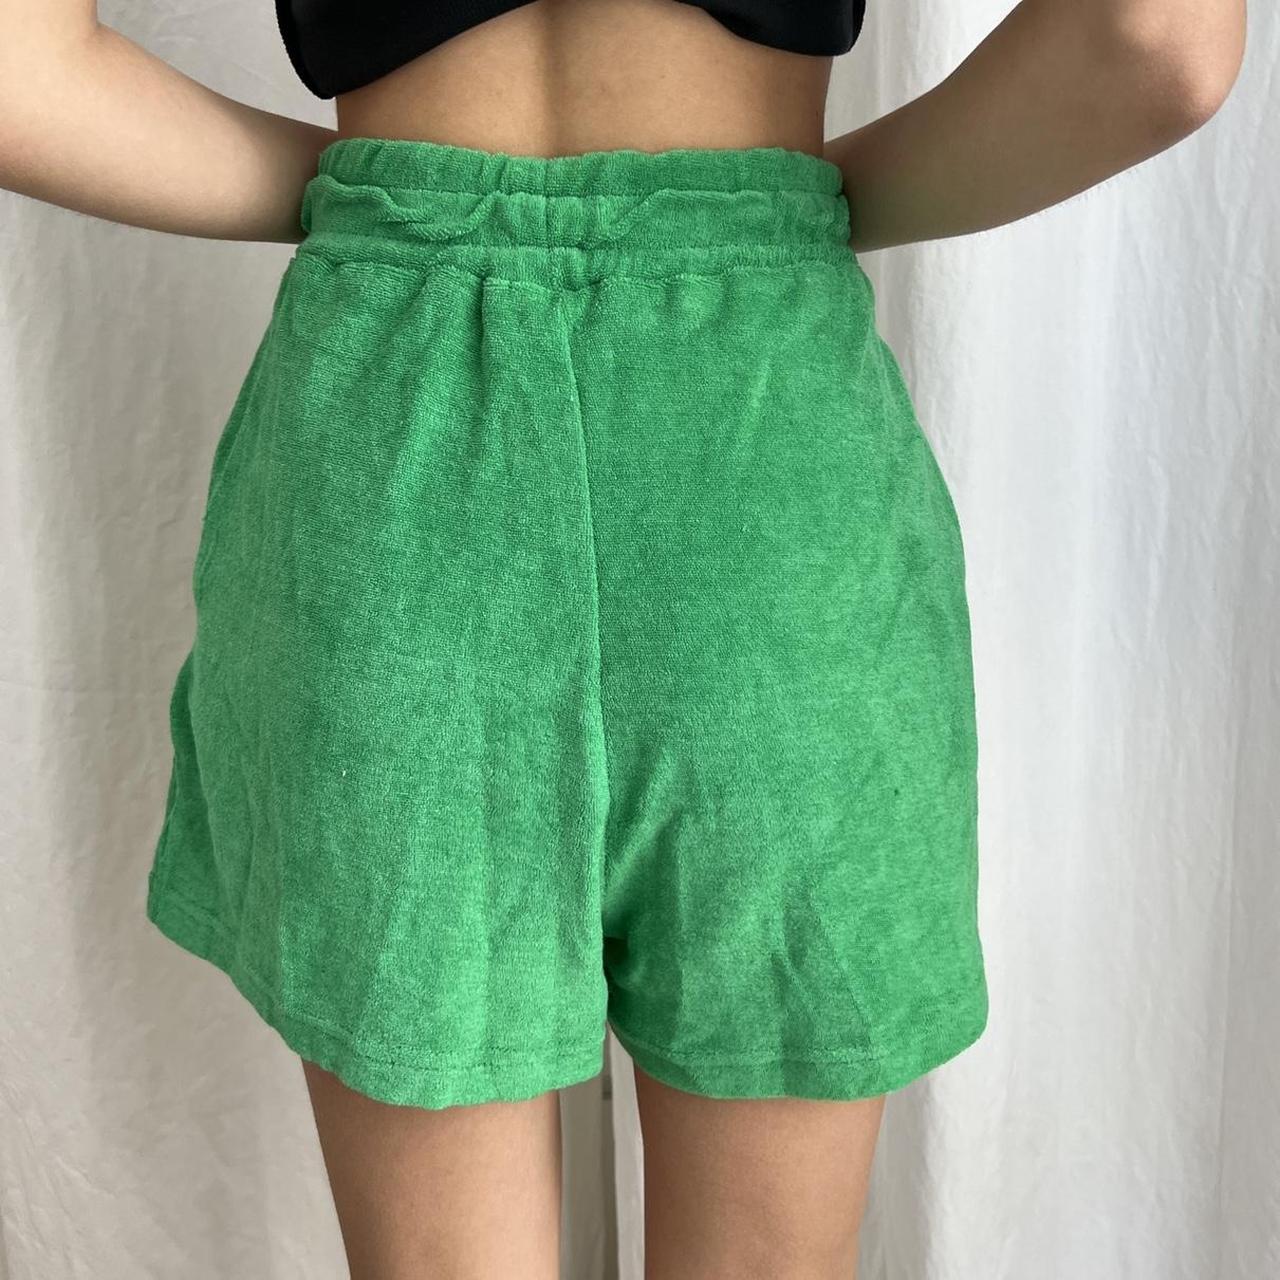 🌟green terry cloth shorts🌟 super soft and... - Depop